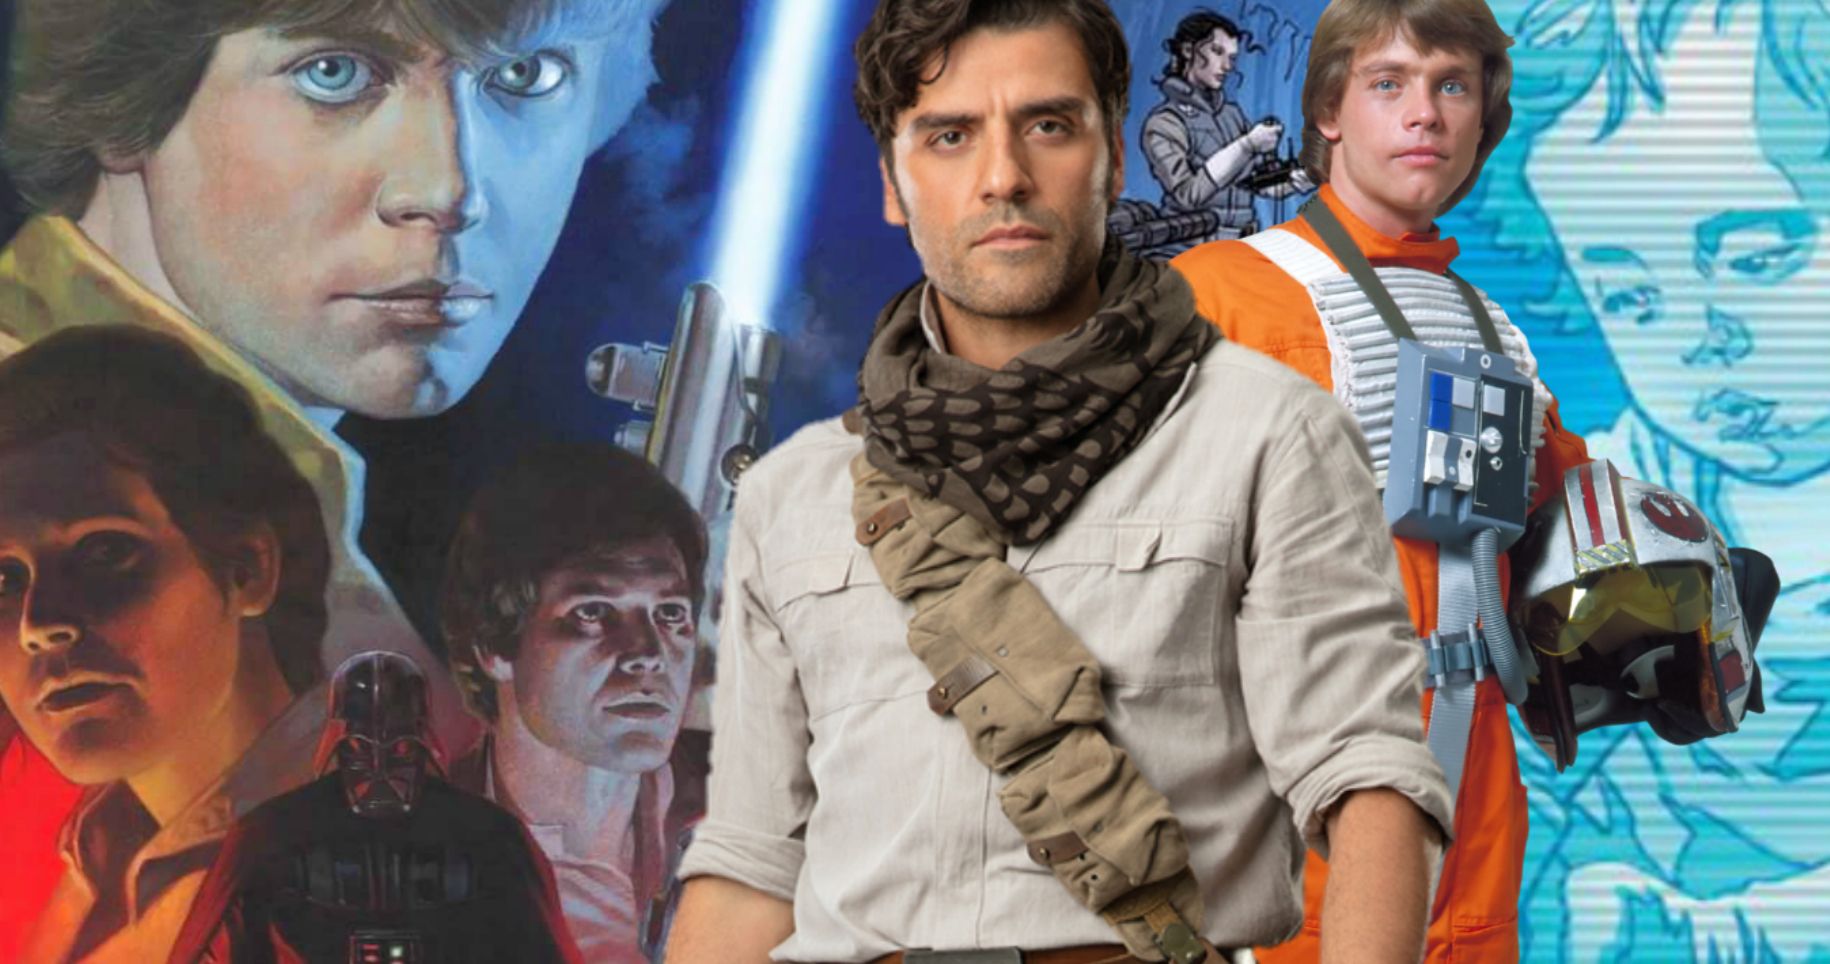 Luke and Poe's Connection Revealed in New Star Wars Comic